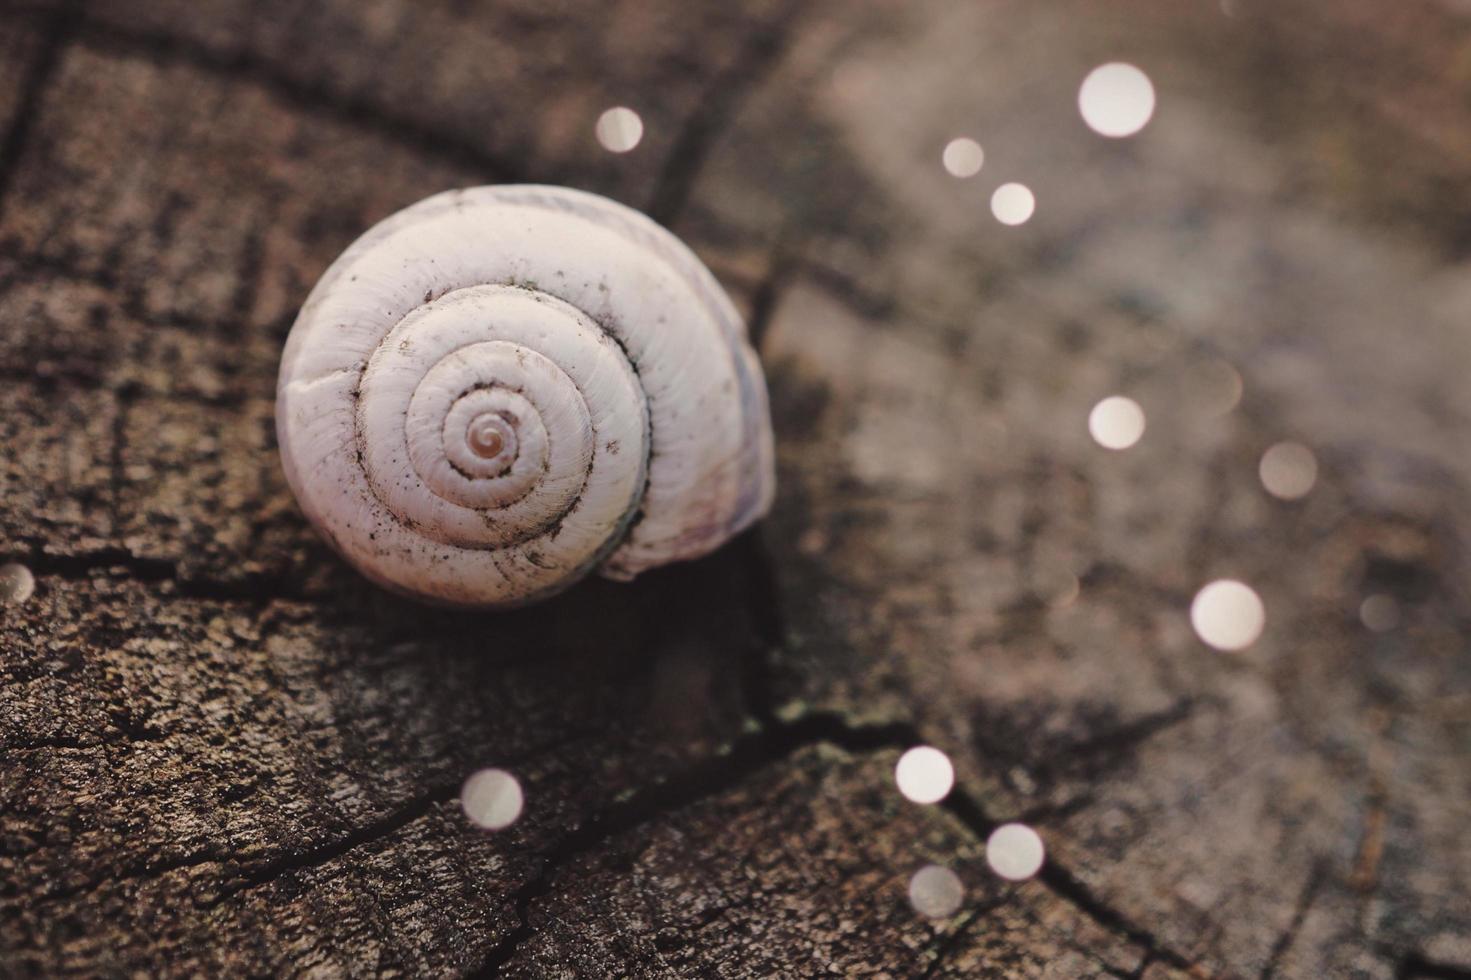 White snail in nature photo